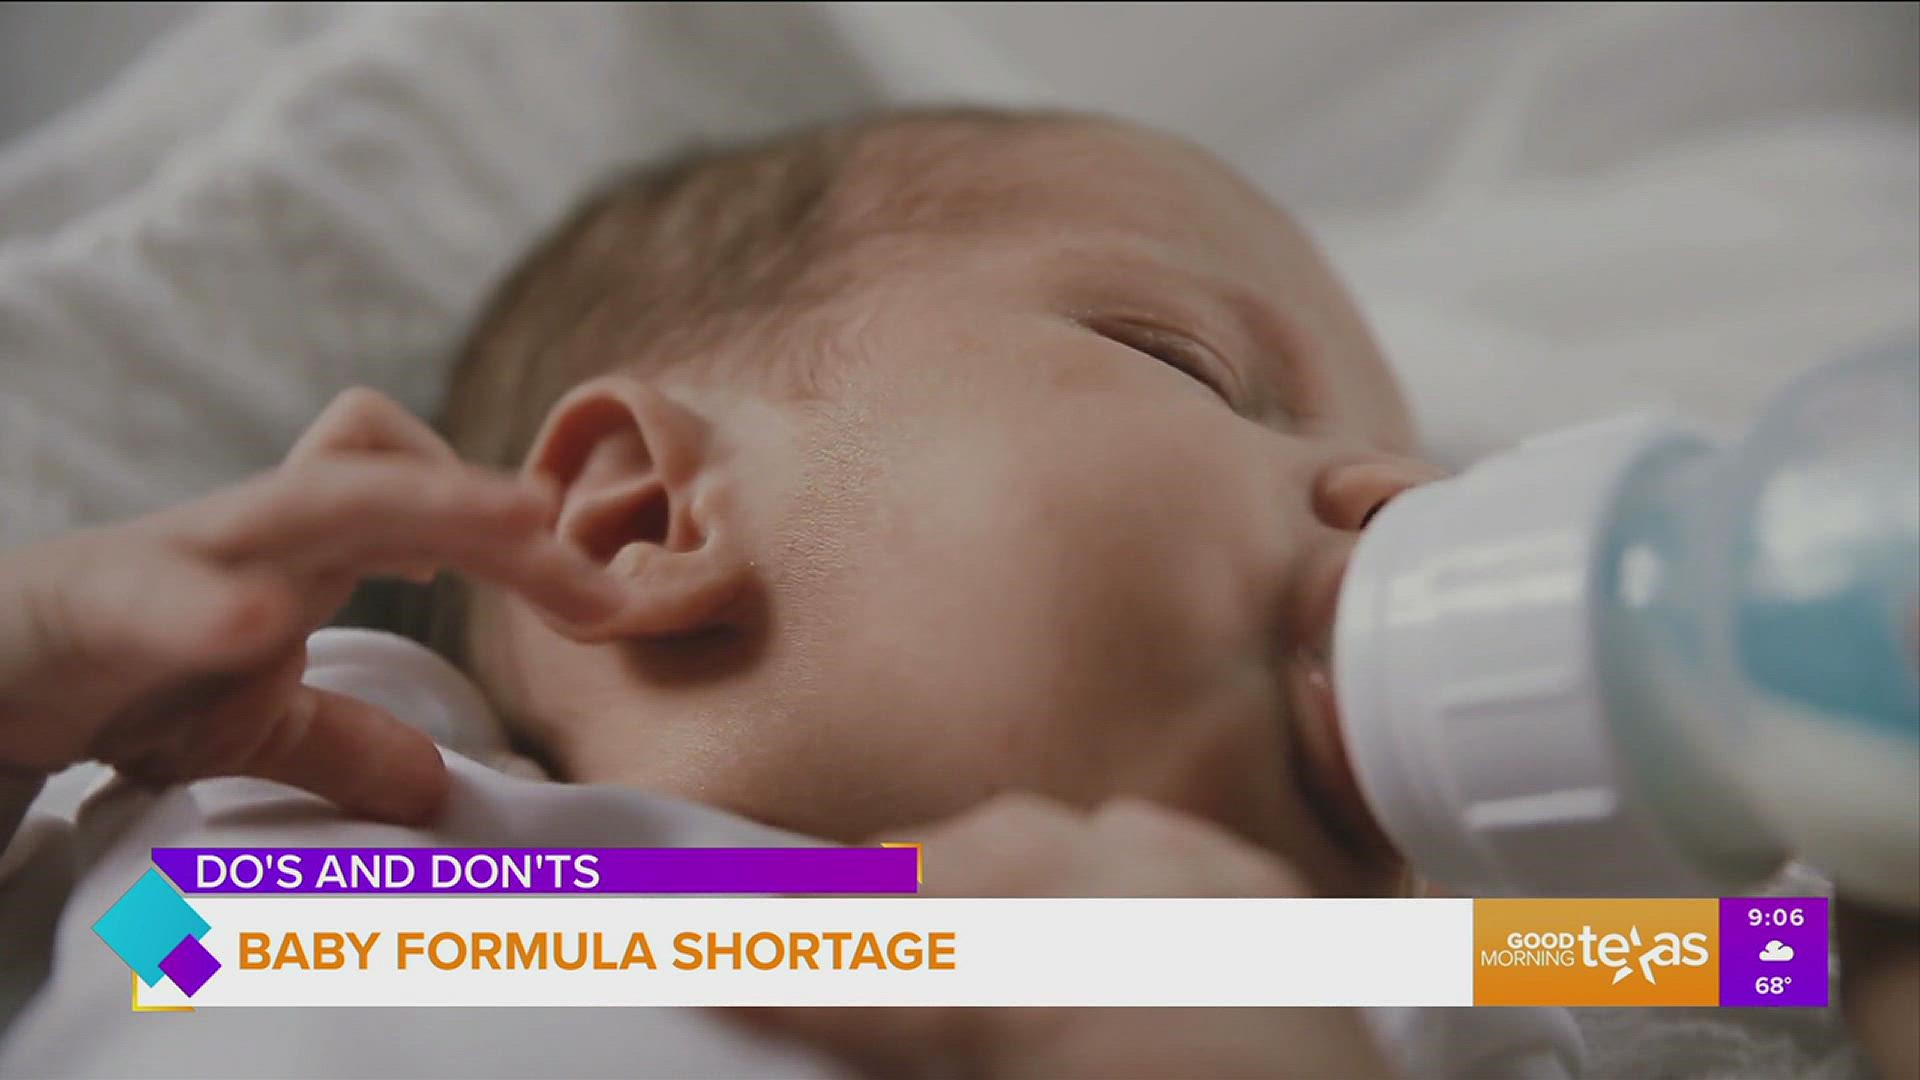 Courtney Gowin helps explains the Dos and Don’ts when it comes to the baby formula shortage.